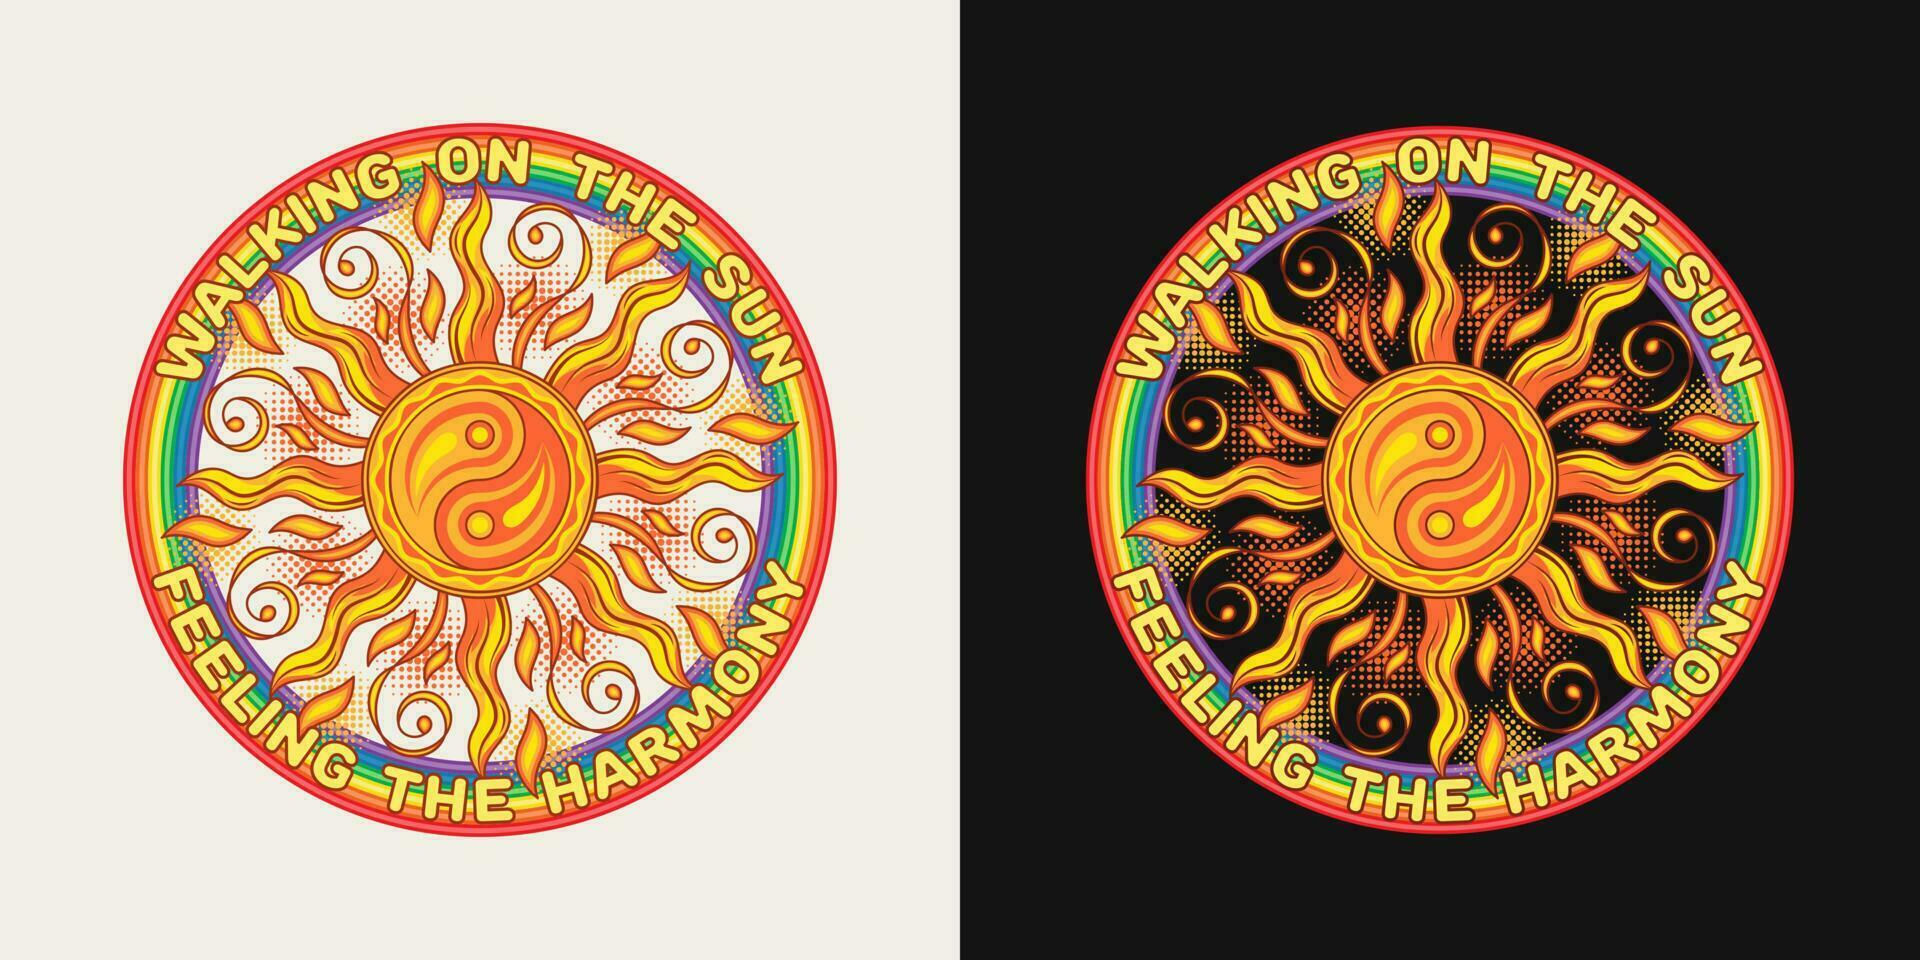 Circular label with sun, ying yang symbol, rainbow, text. Concept of harmony and balance. Groovy, hippie style. For clothing, apparel, T-shirts, surface decoration vector